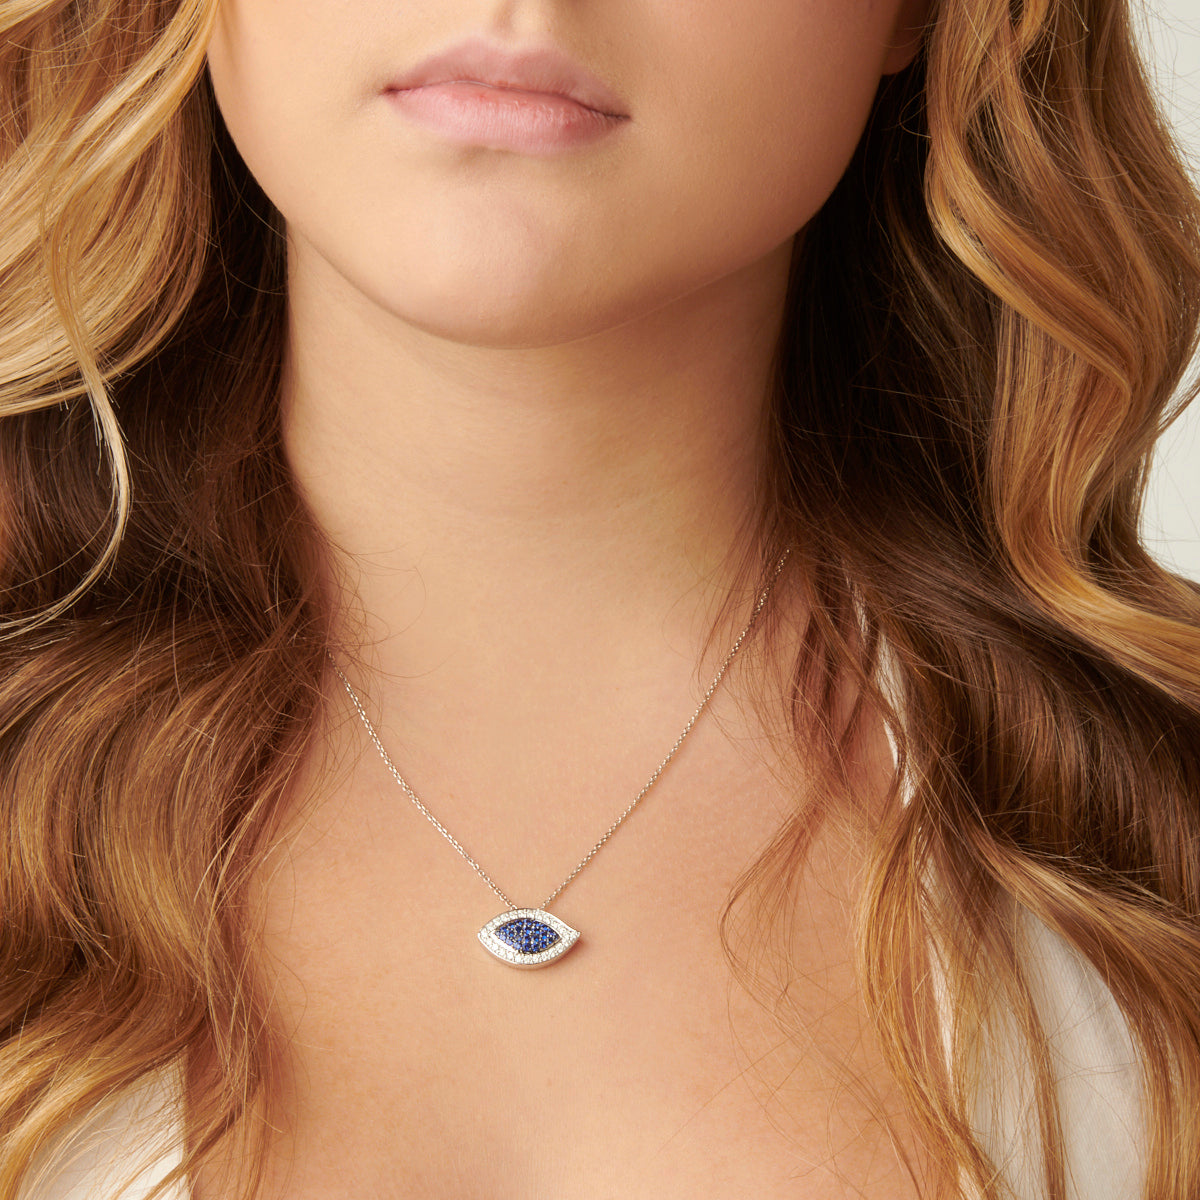 This image shows a woman wearing an Evil Eye Blue Sapphire and Diamond Pendant. The pendant is centered on the woman's neck and is the focus of the image. 